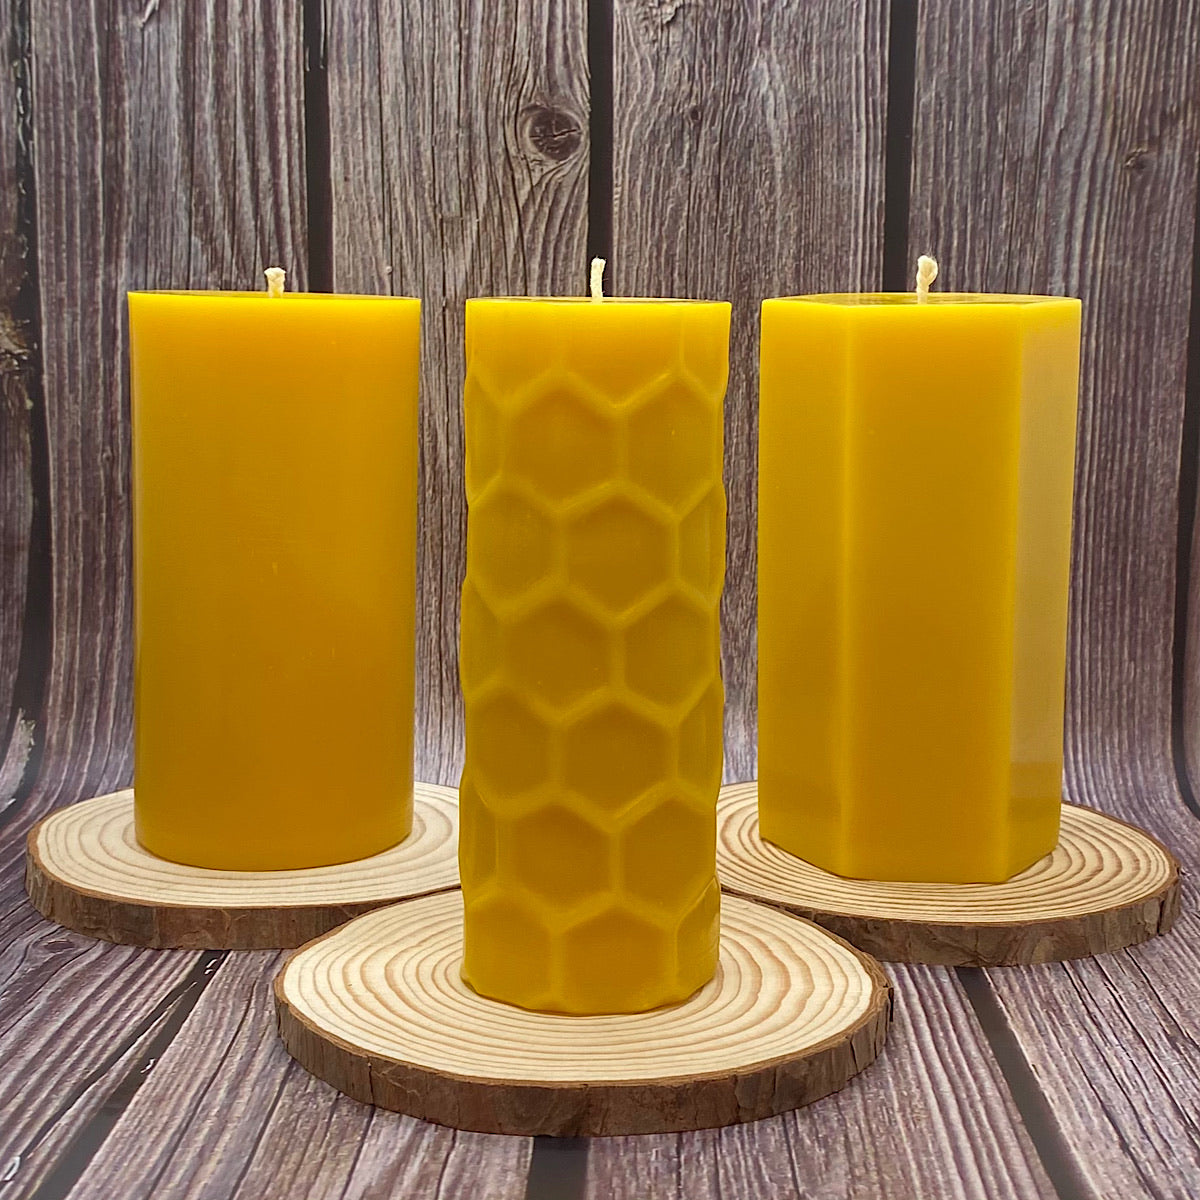 Beeswax candle, best winter candles, Intention candle, slow burning, wedding candle, natural candles, cleaning burning, yellow candle, self-care, scent free, natural deodorizer, Living room décor, church candles